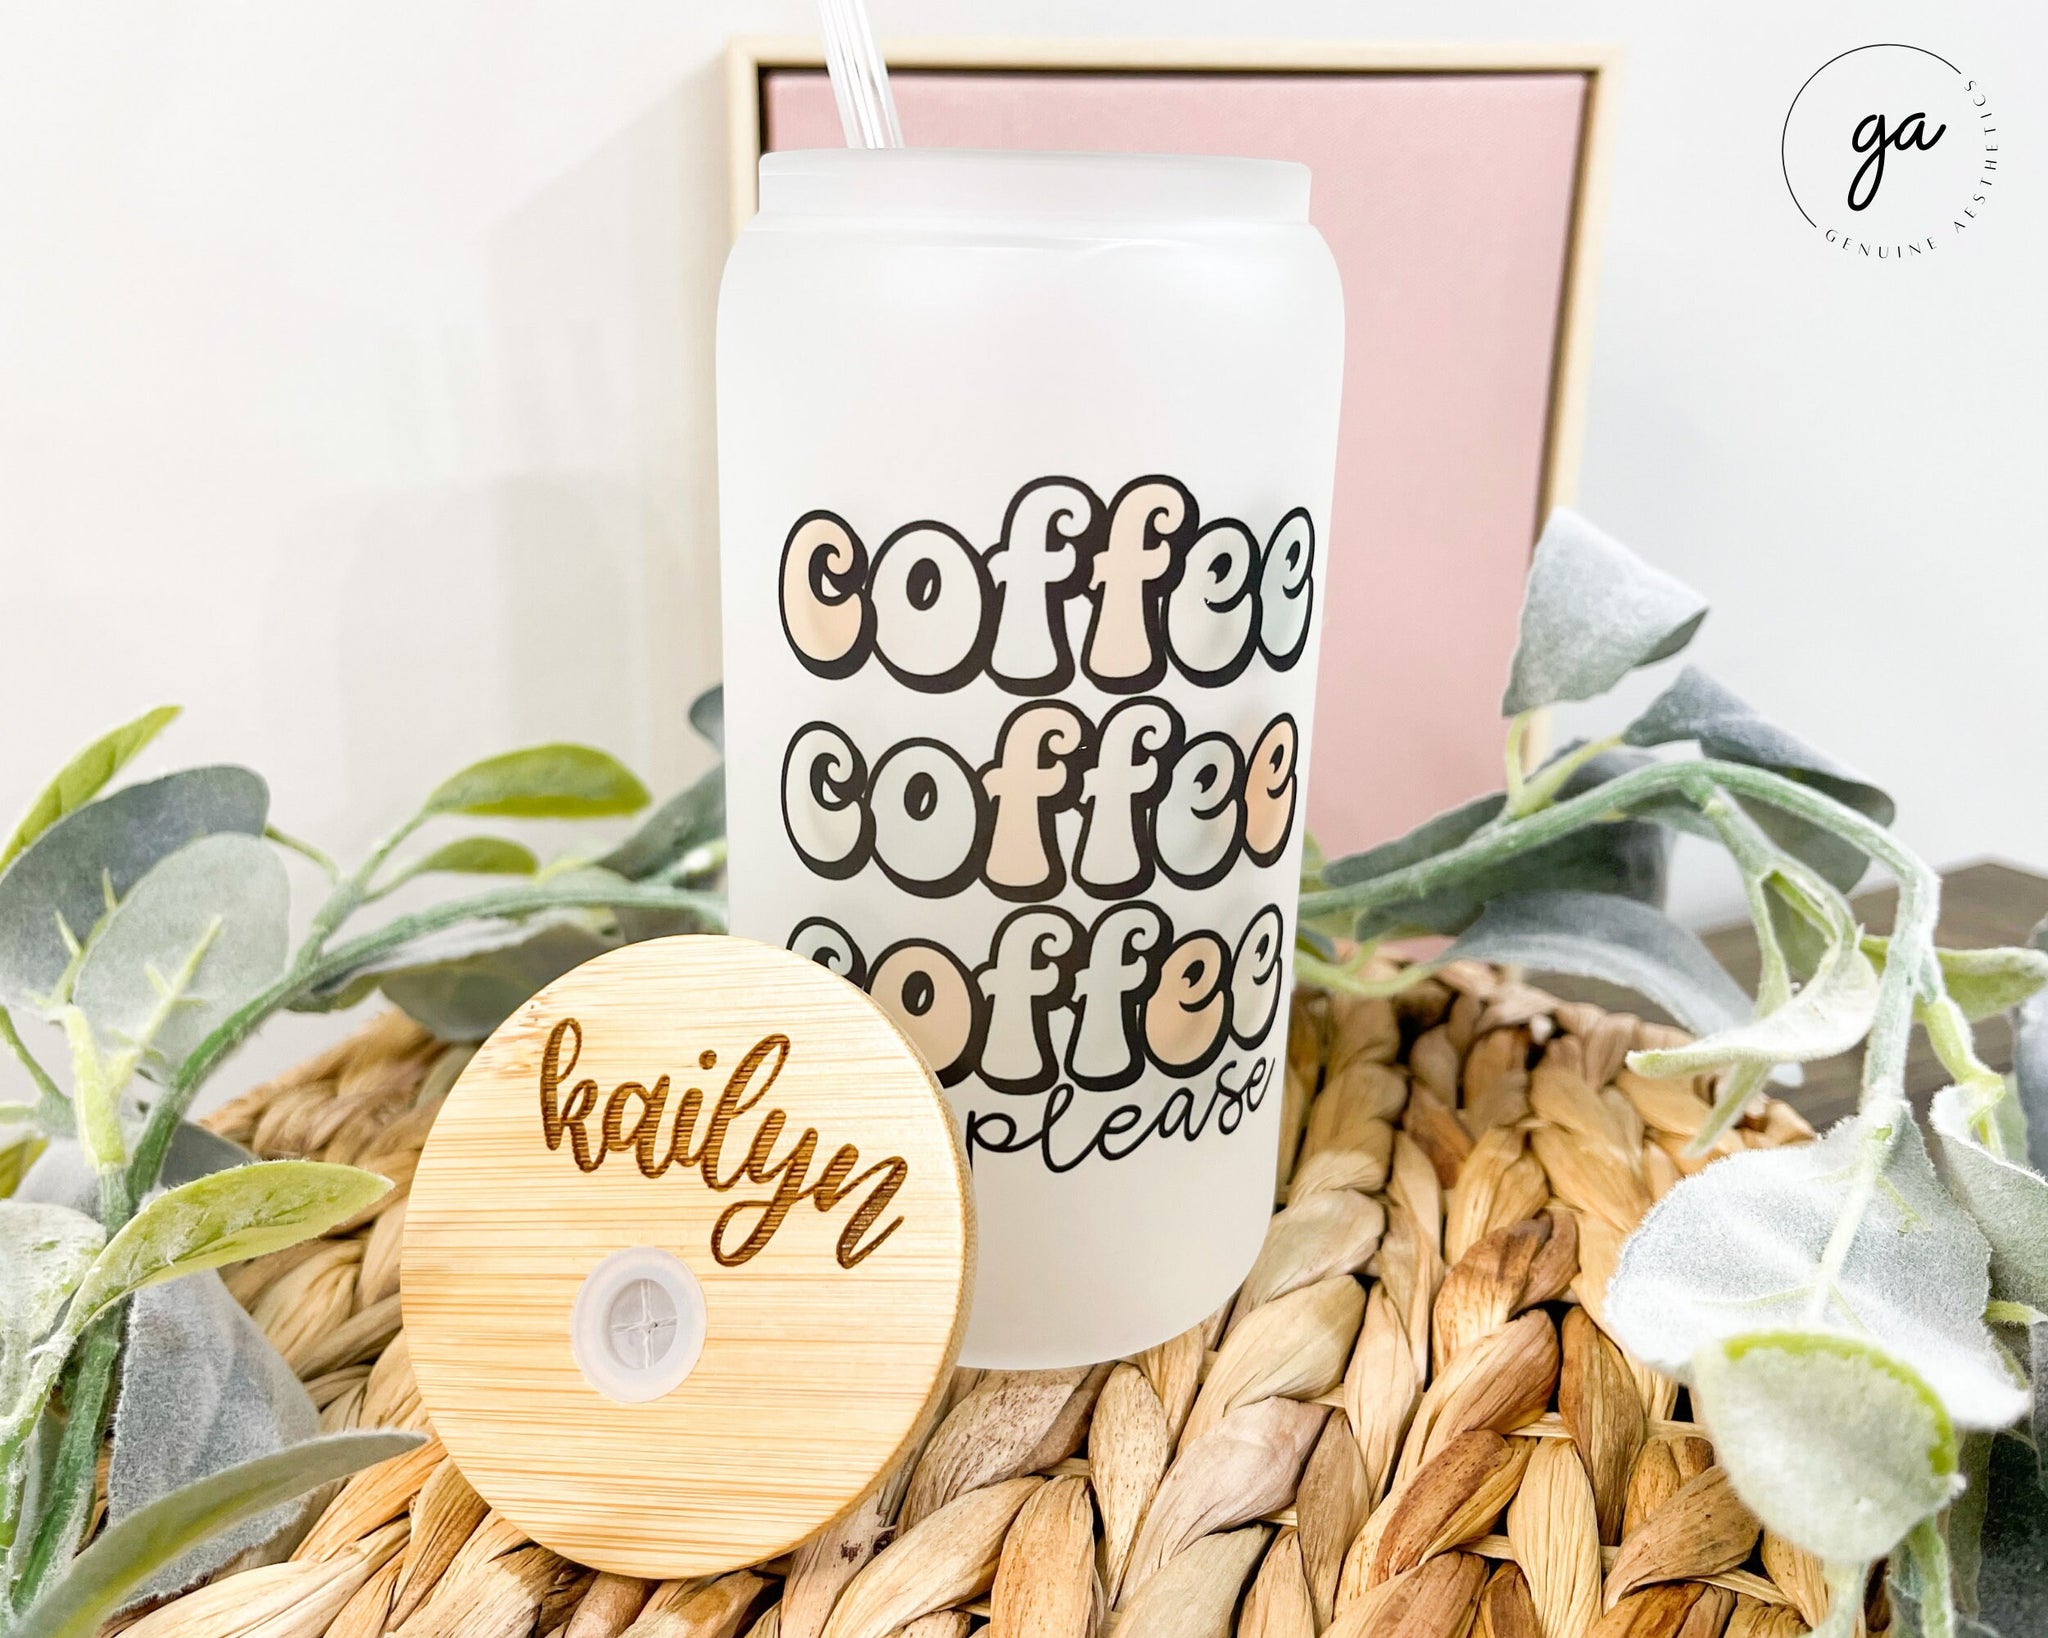 16oz Glass Coffee Can, Iced Coffee Glass, Glass Coffee Cup, Aesthetic Glass  Coffee Cup, Soda Can Glass, Mothers Day Gift